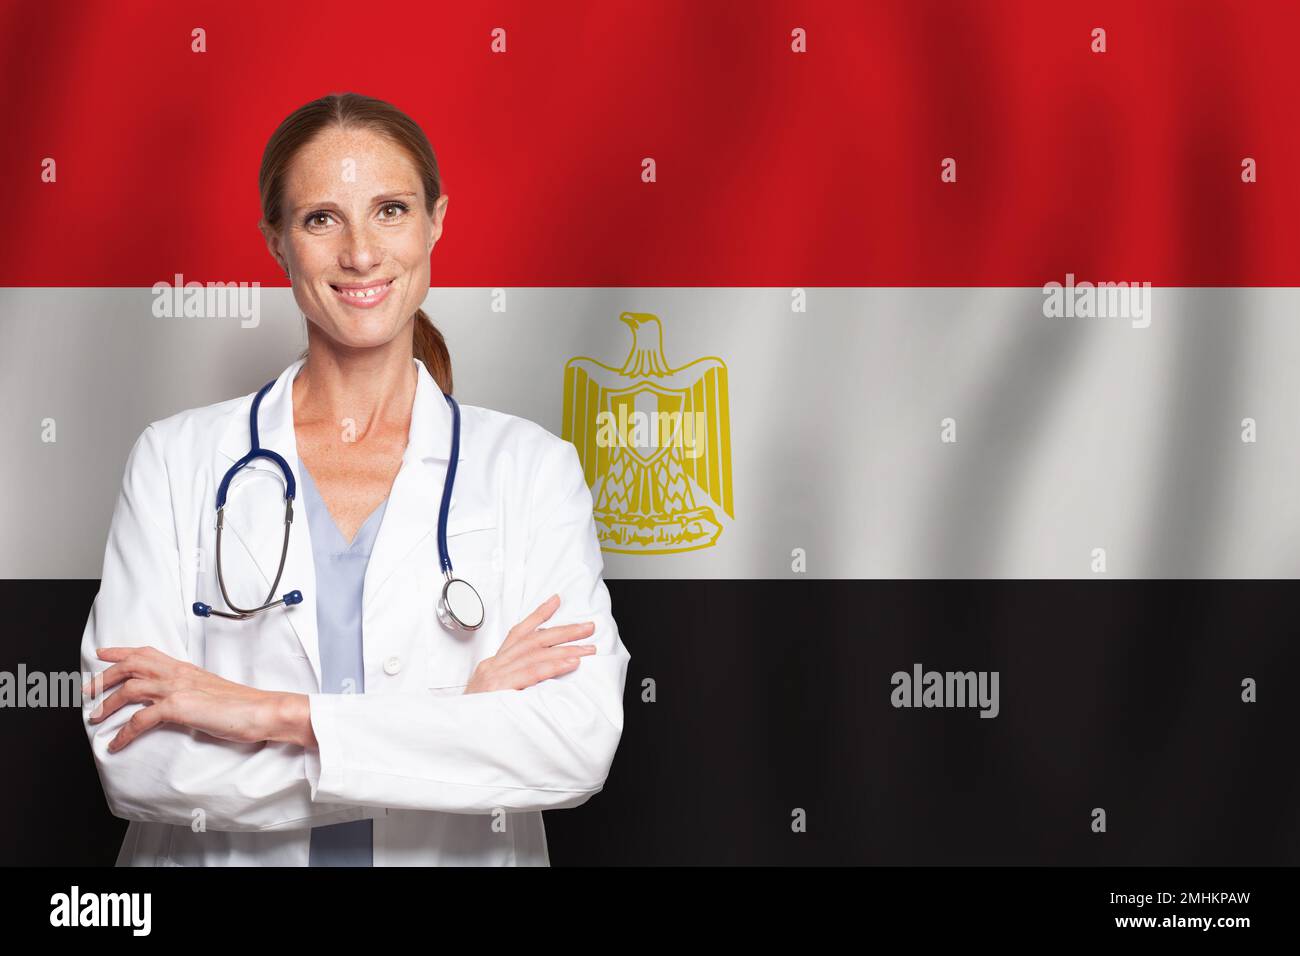 Egyptian general practitioner doctor gp on the flag of Egypt Stock Photo